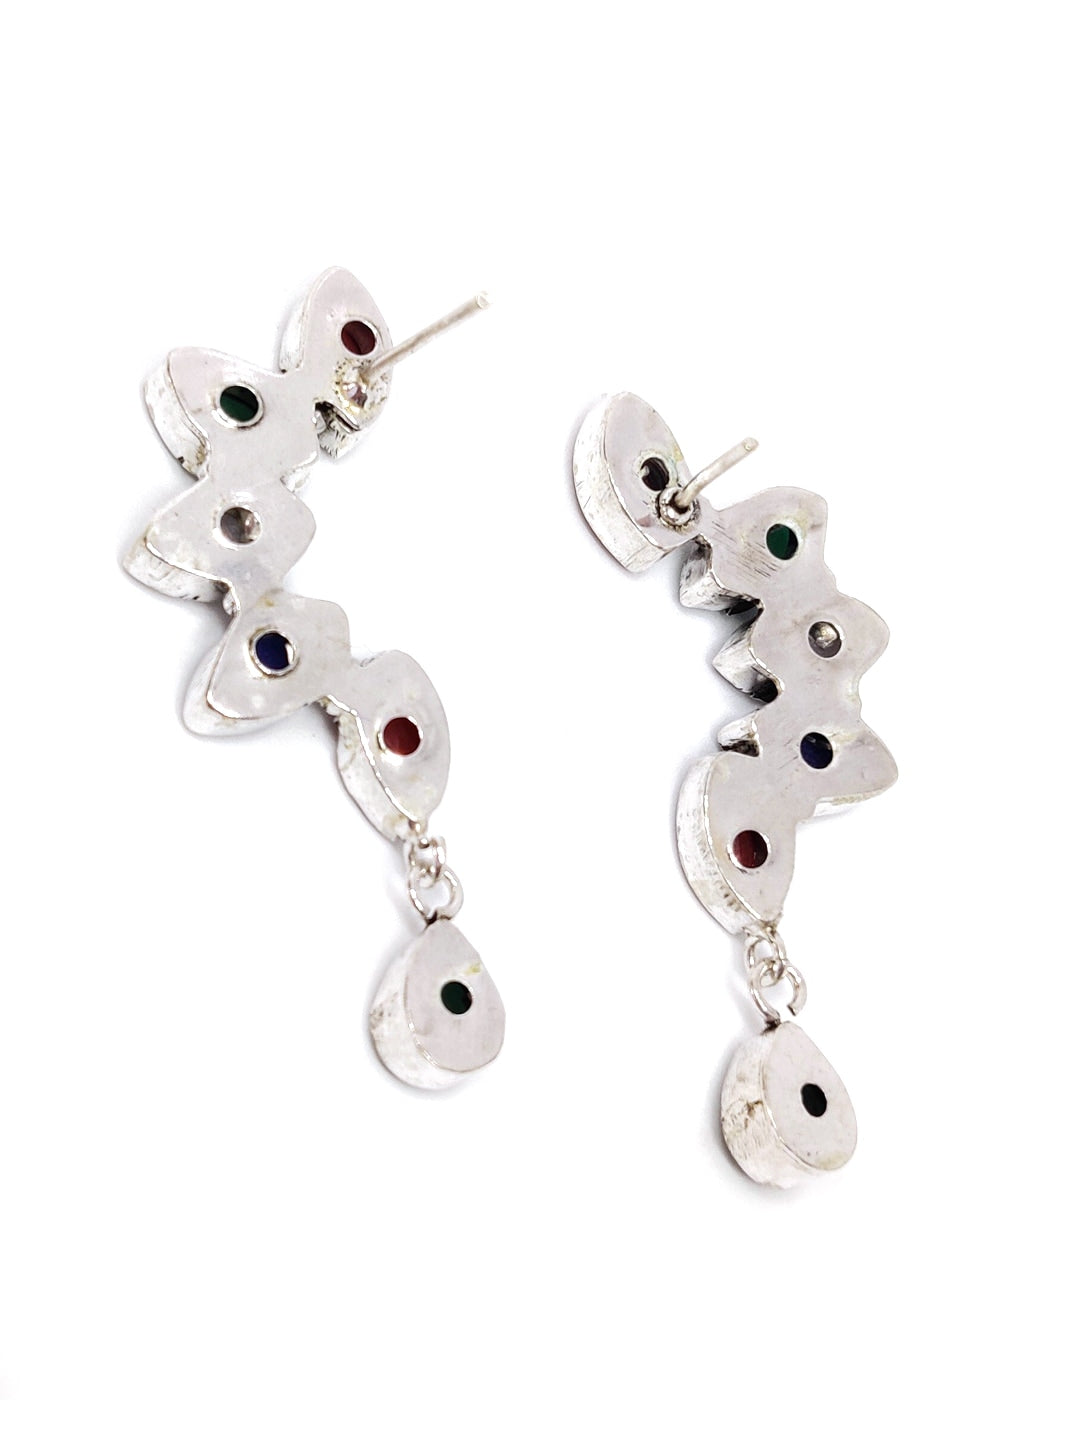 EL REGALO Red & Green Contemporary German Silver Ear Cuff Earrings - for Women and Girls
Style ID: 16770286